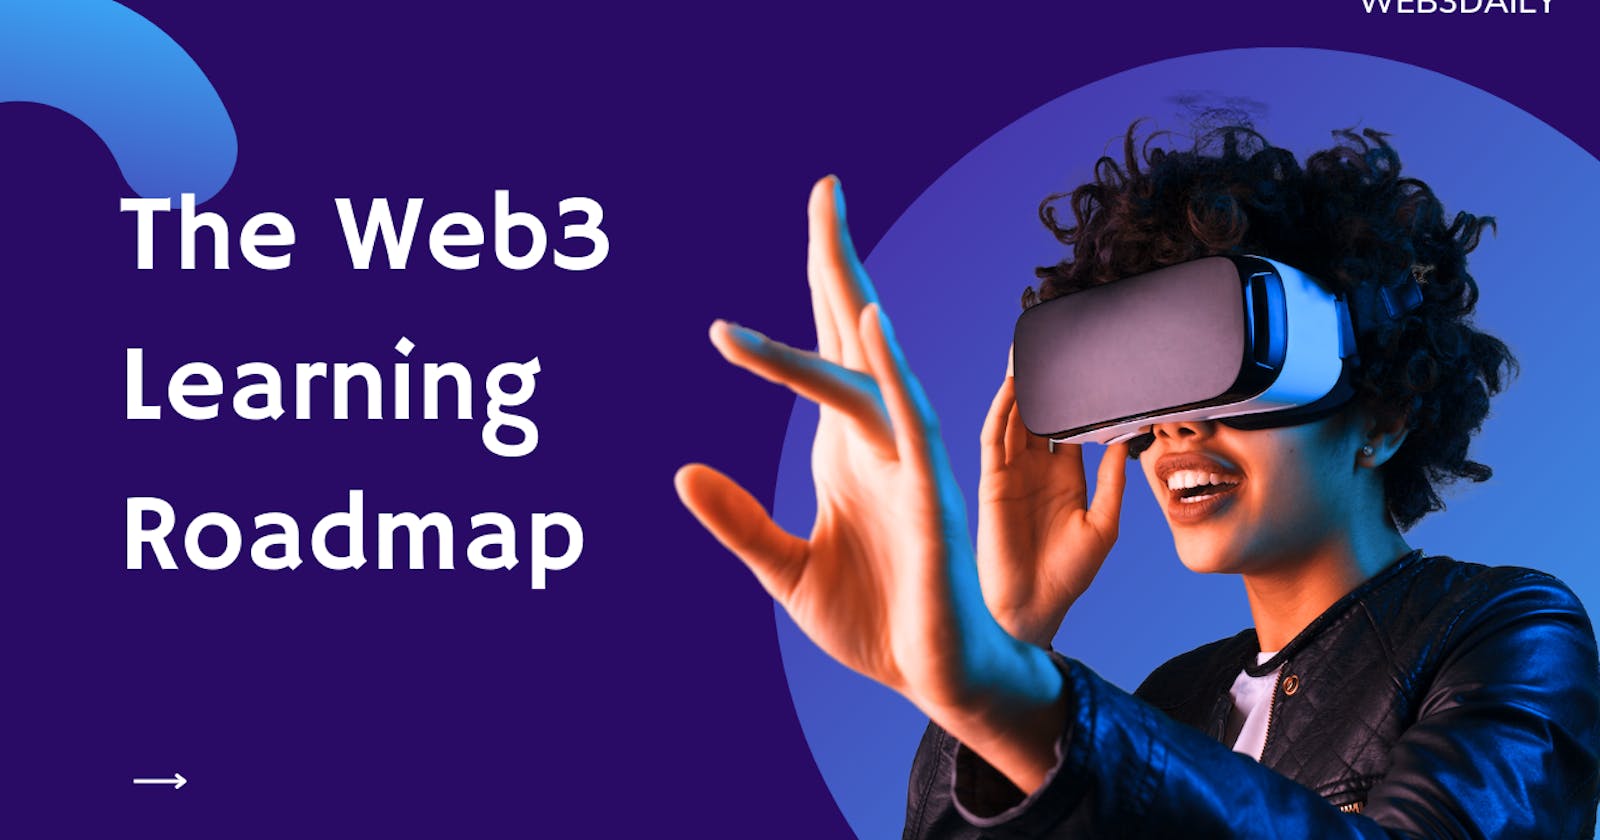 The Ultimate Web3 Learning Roadmap